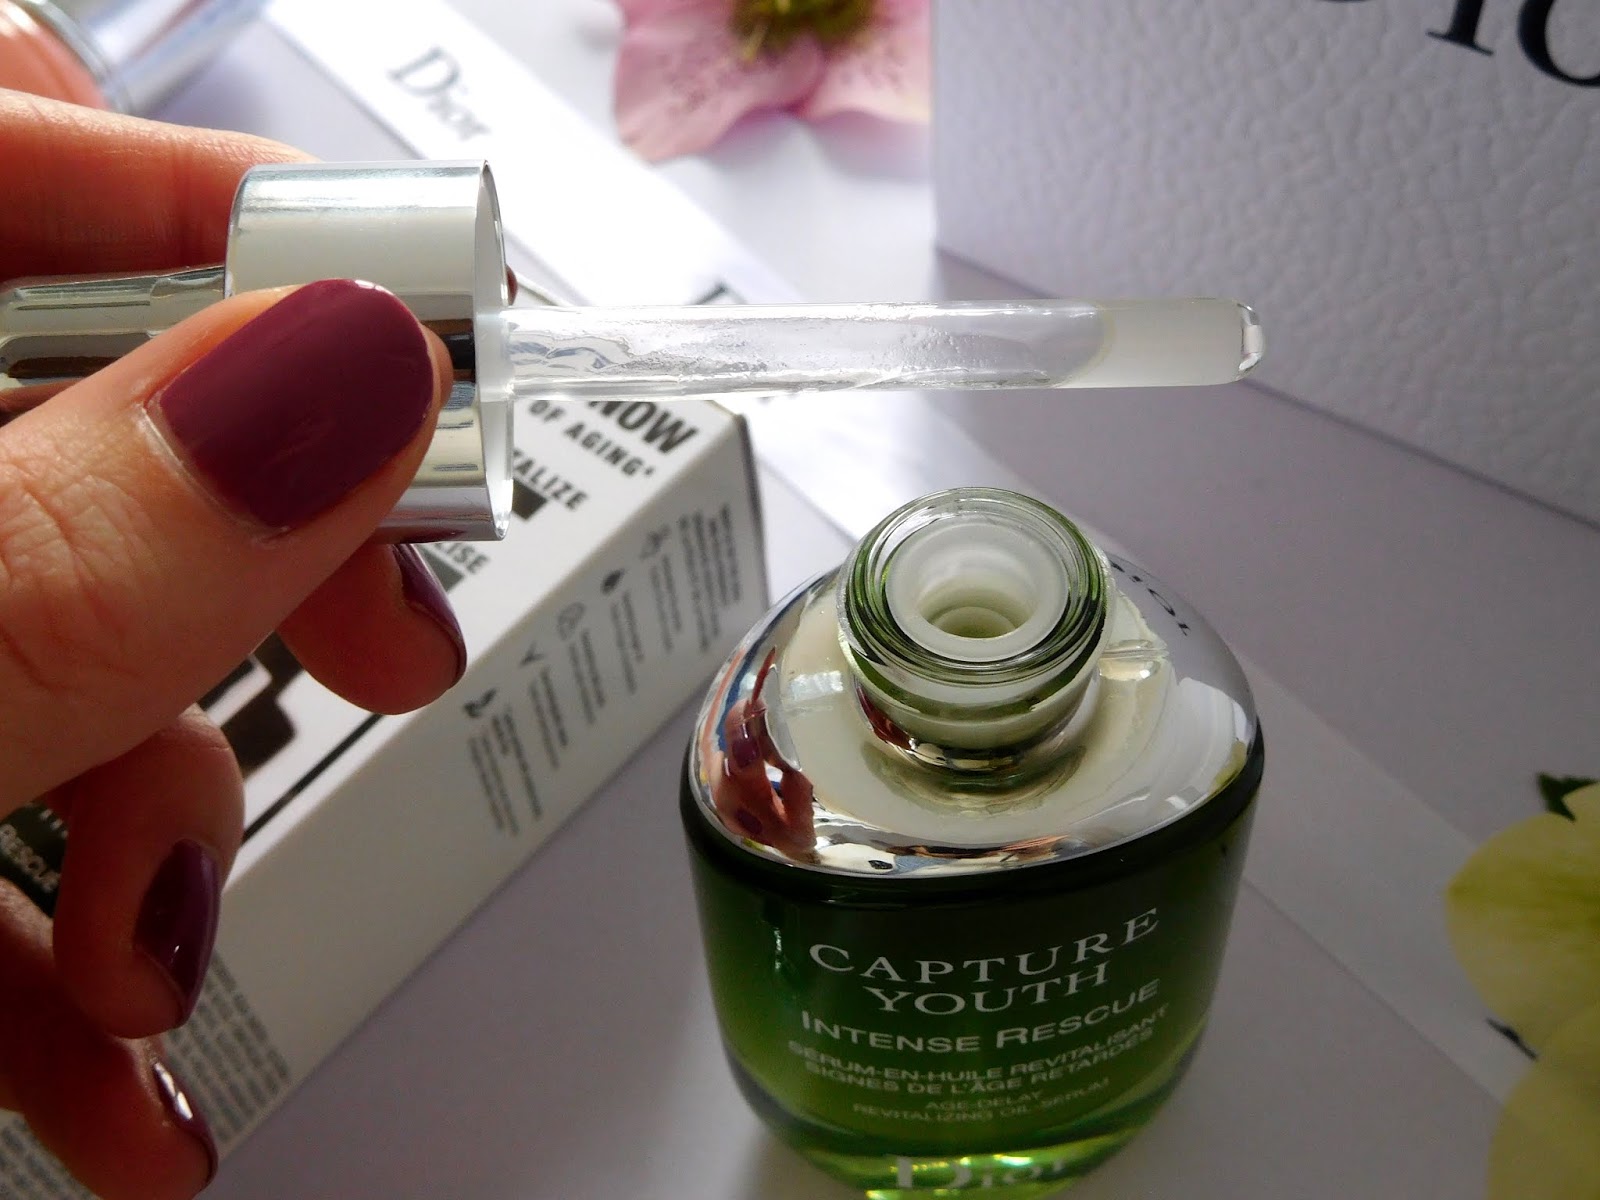 dior capture youth intense rescue review